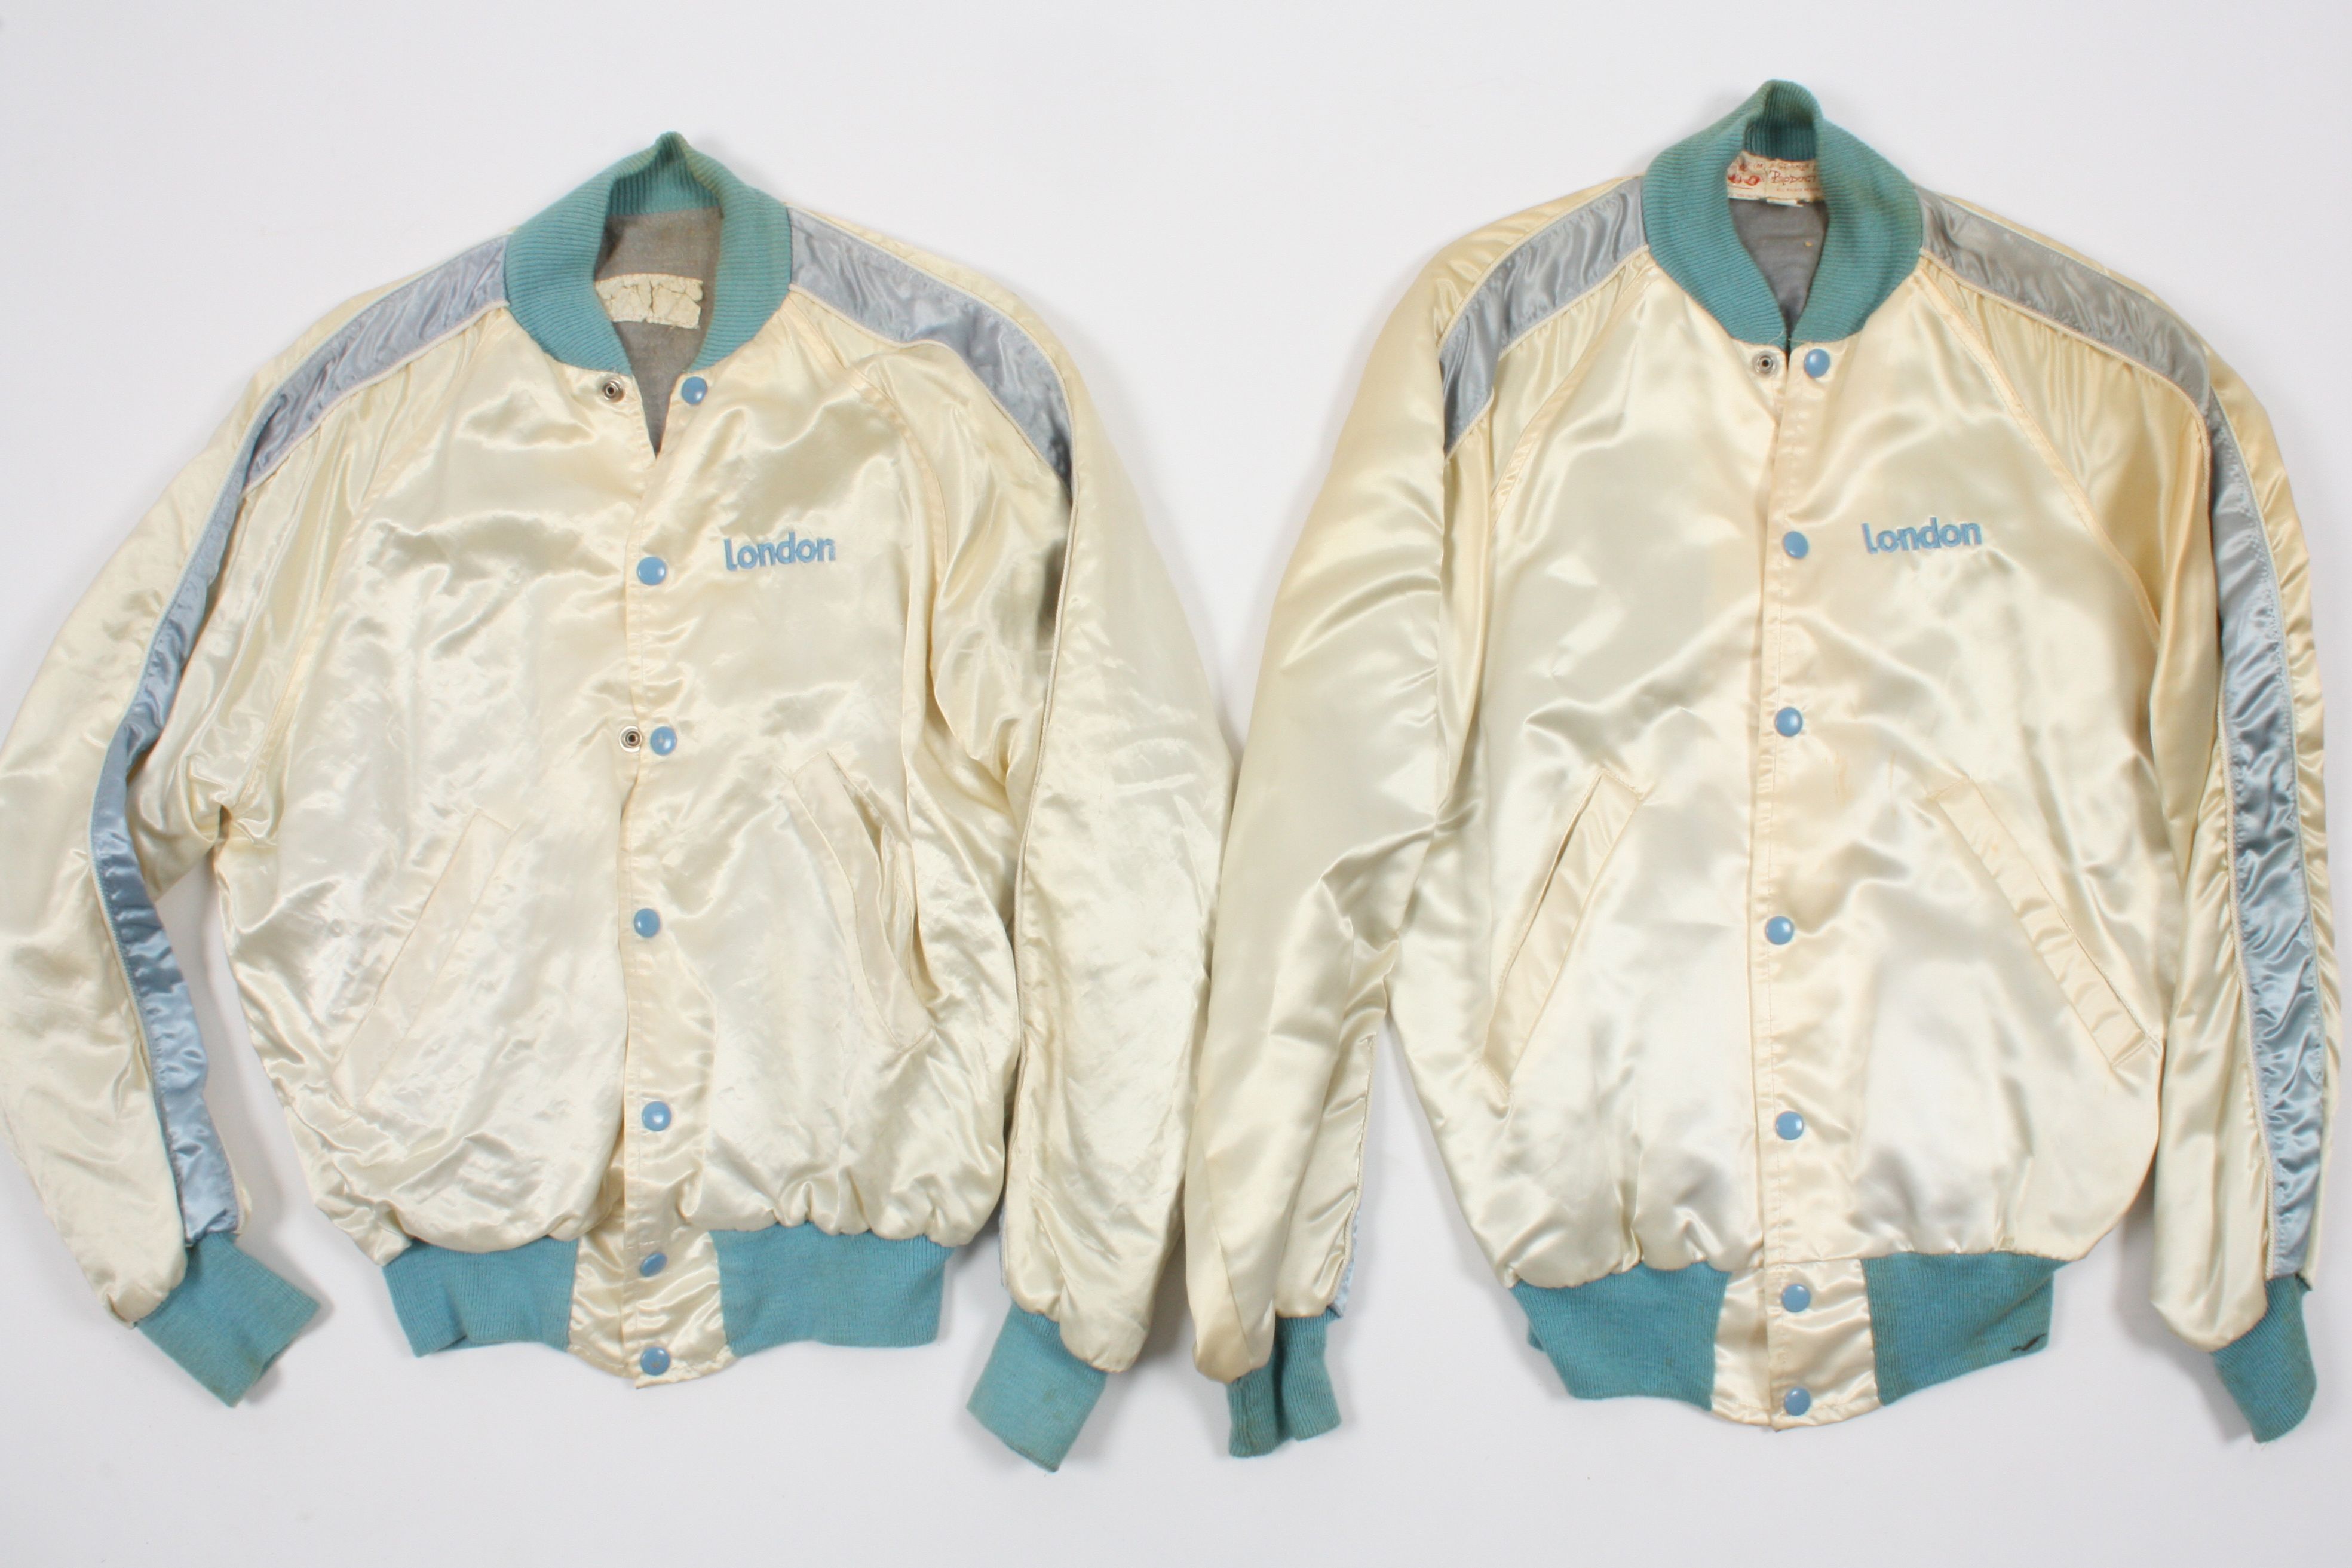 Two Frank Sinatra London Tour jackets
finished in cream and pale blue satin, the backs - Image 2 of 2